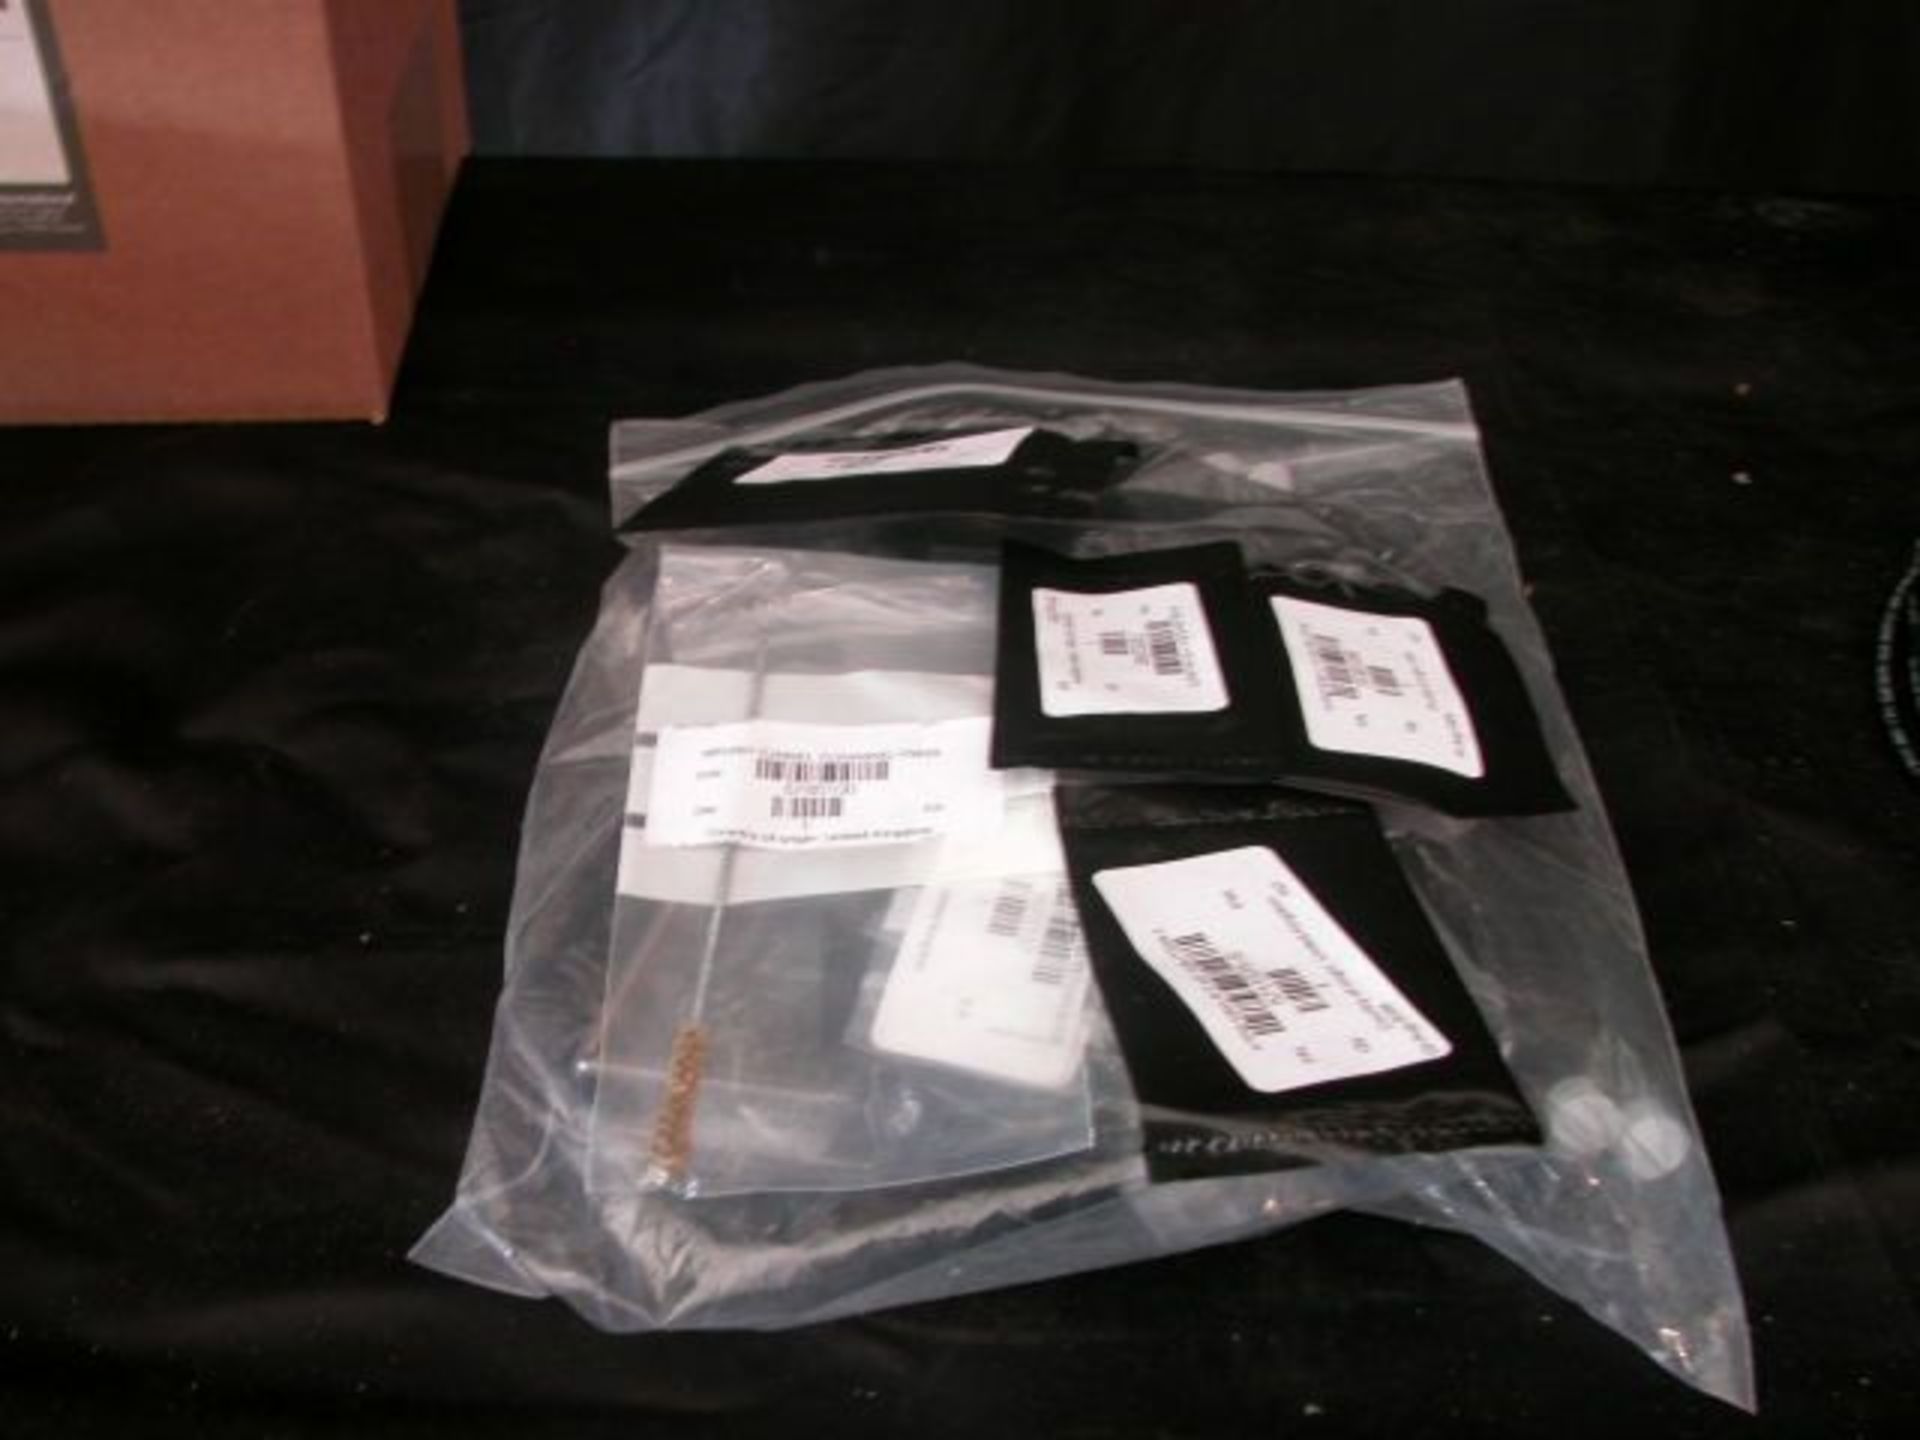 Waters/Micromass Q-Tof Ultima Mass Spectrometer P.M. KIT W/ Extras, Qty 1, 321118842113 - Image 10 of 13